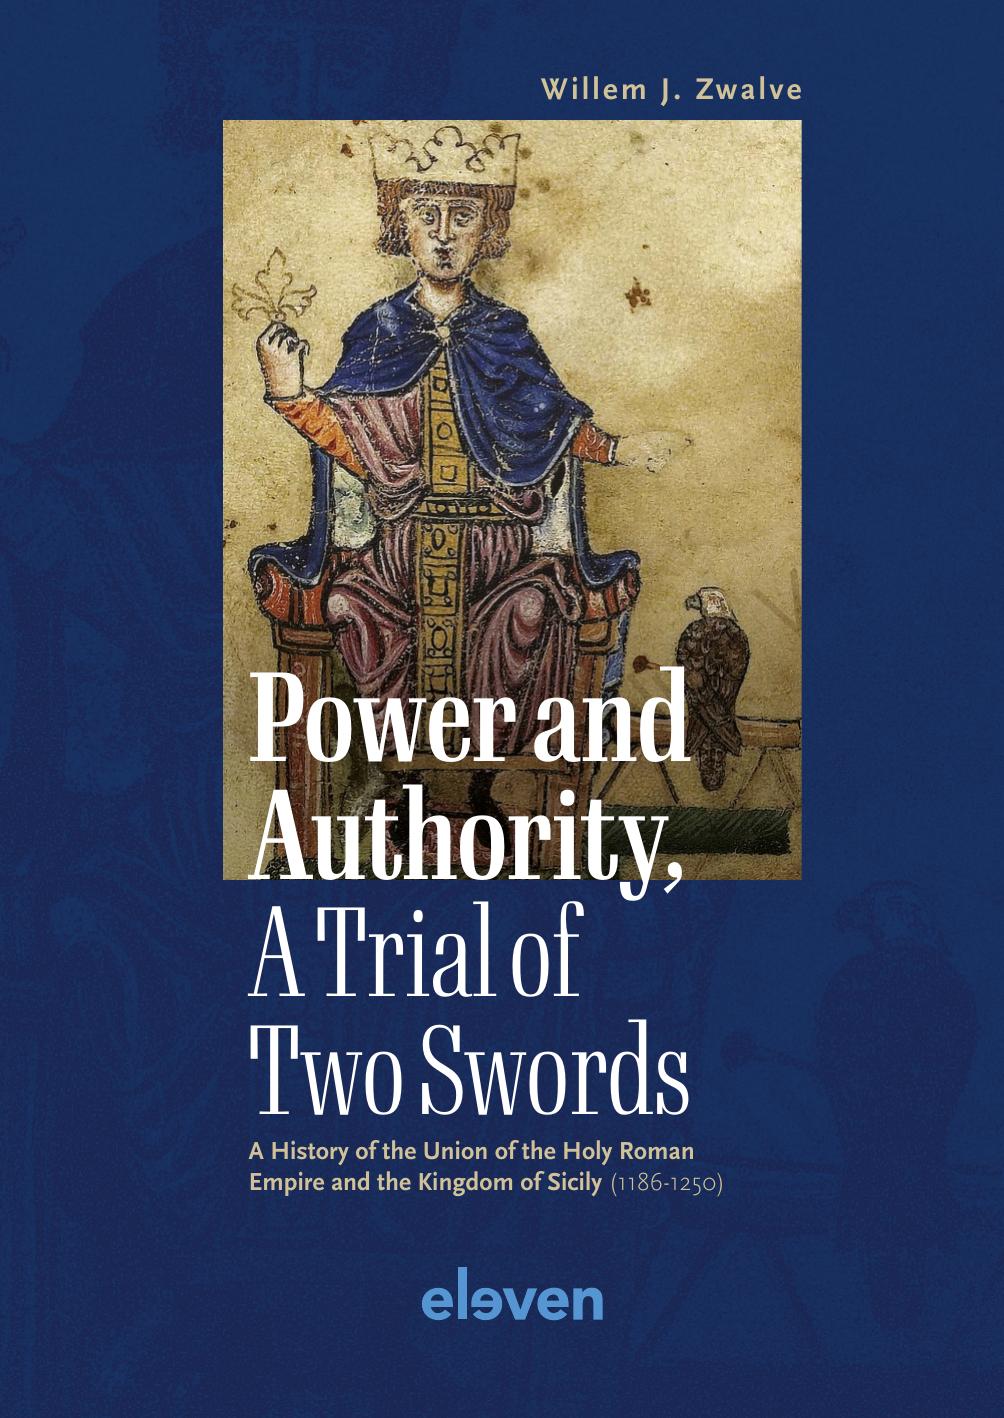 Power and Authority, A Trial of Two Swords: A History of the Union of the Holy Roman Empire and the Kingdom of Sicily (1186-1250) by Willem J. Zwalve